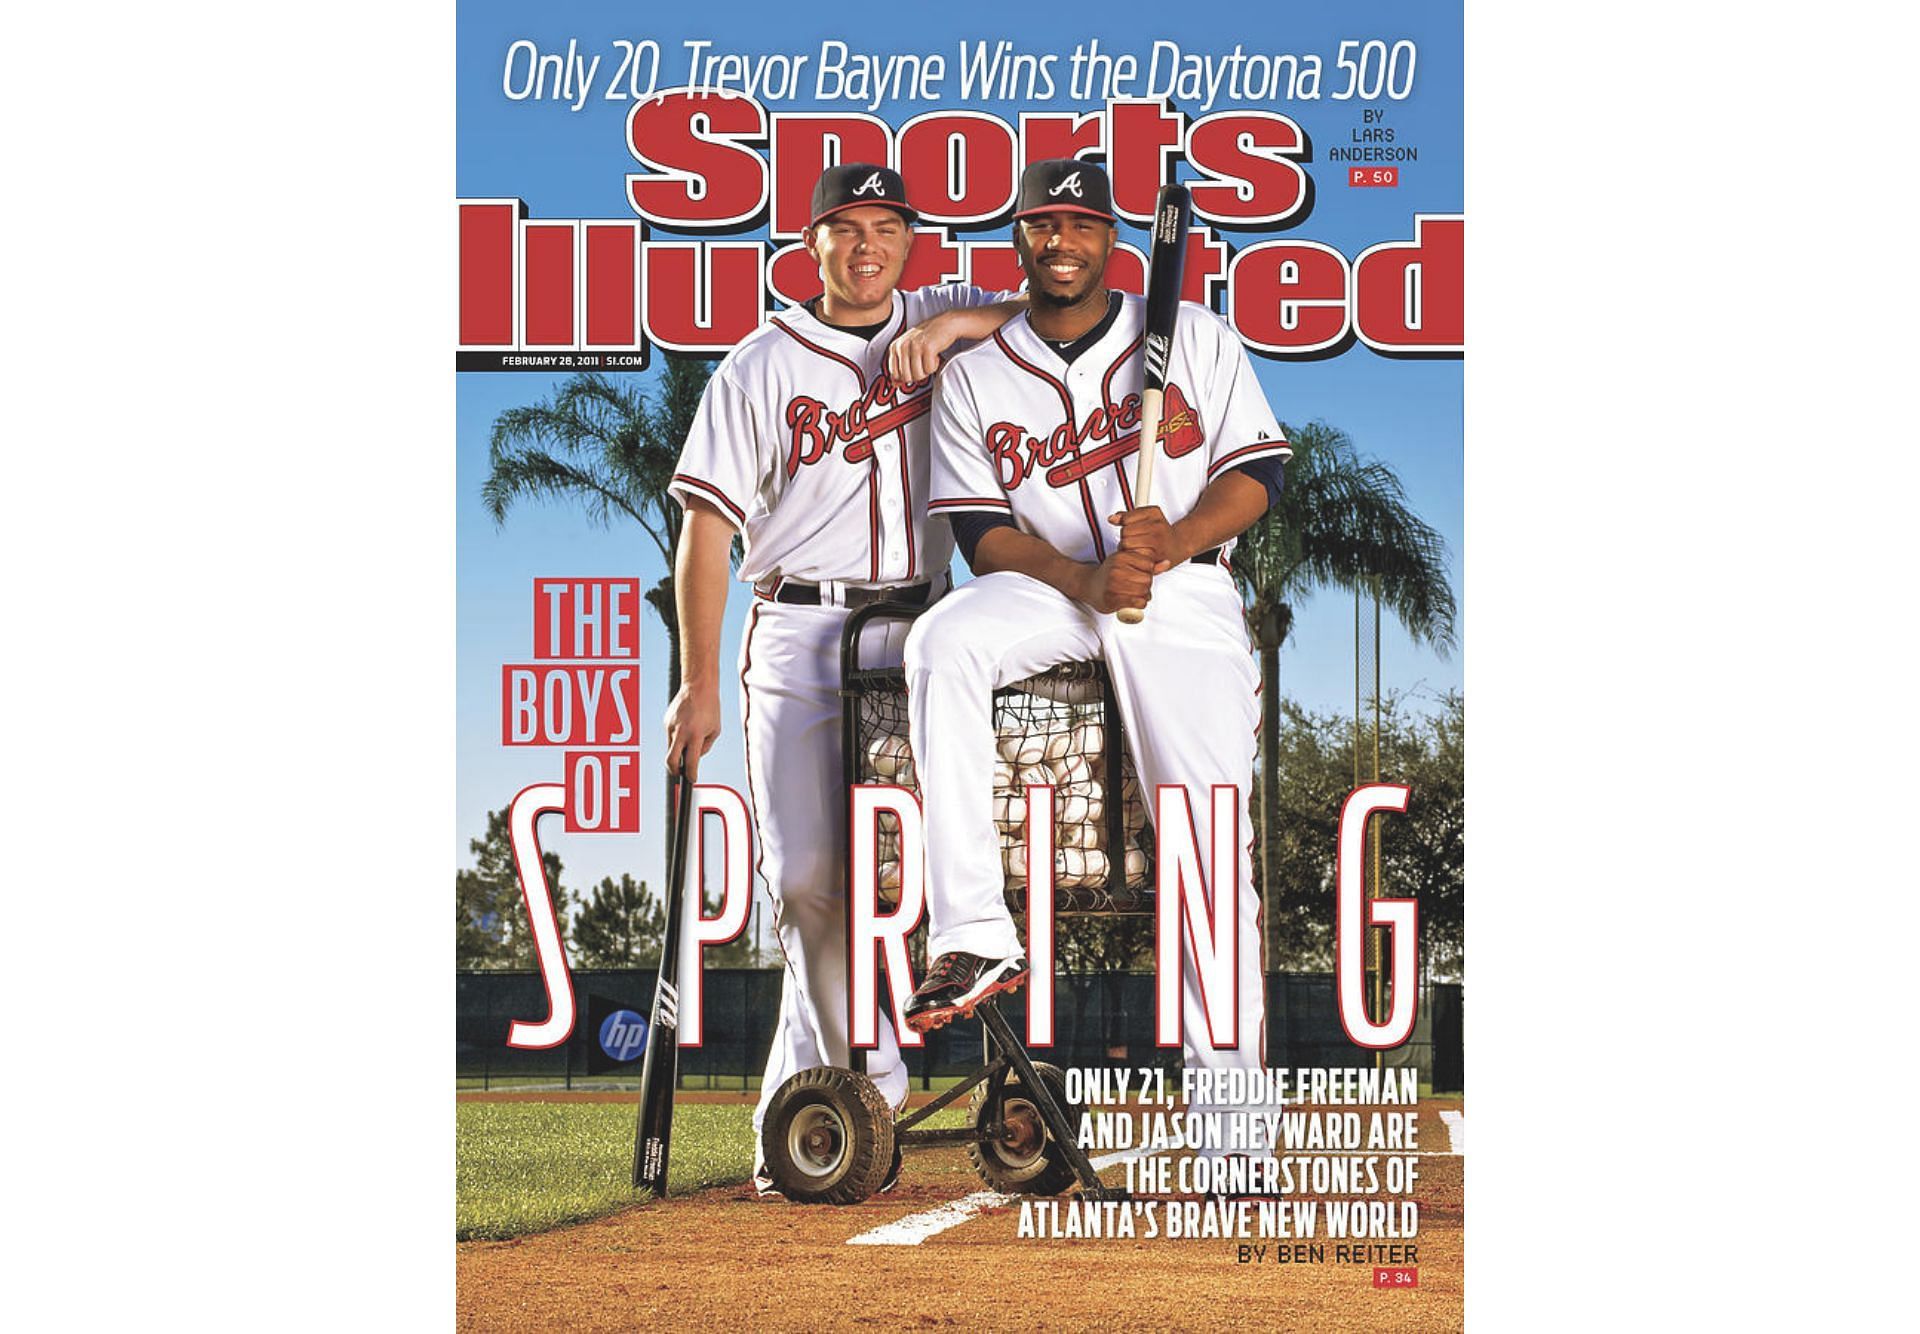 Freeman and Heyward during their time in Atlanta (Image via Sports Illustrated Covers)